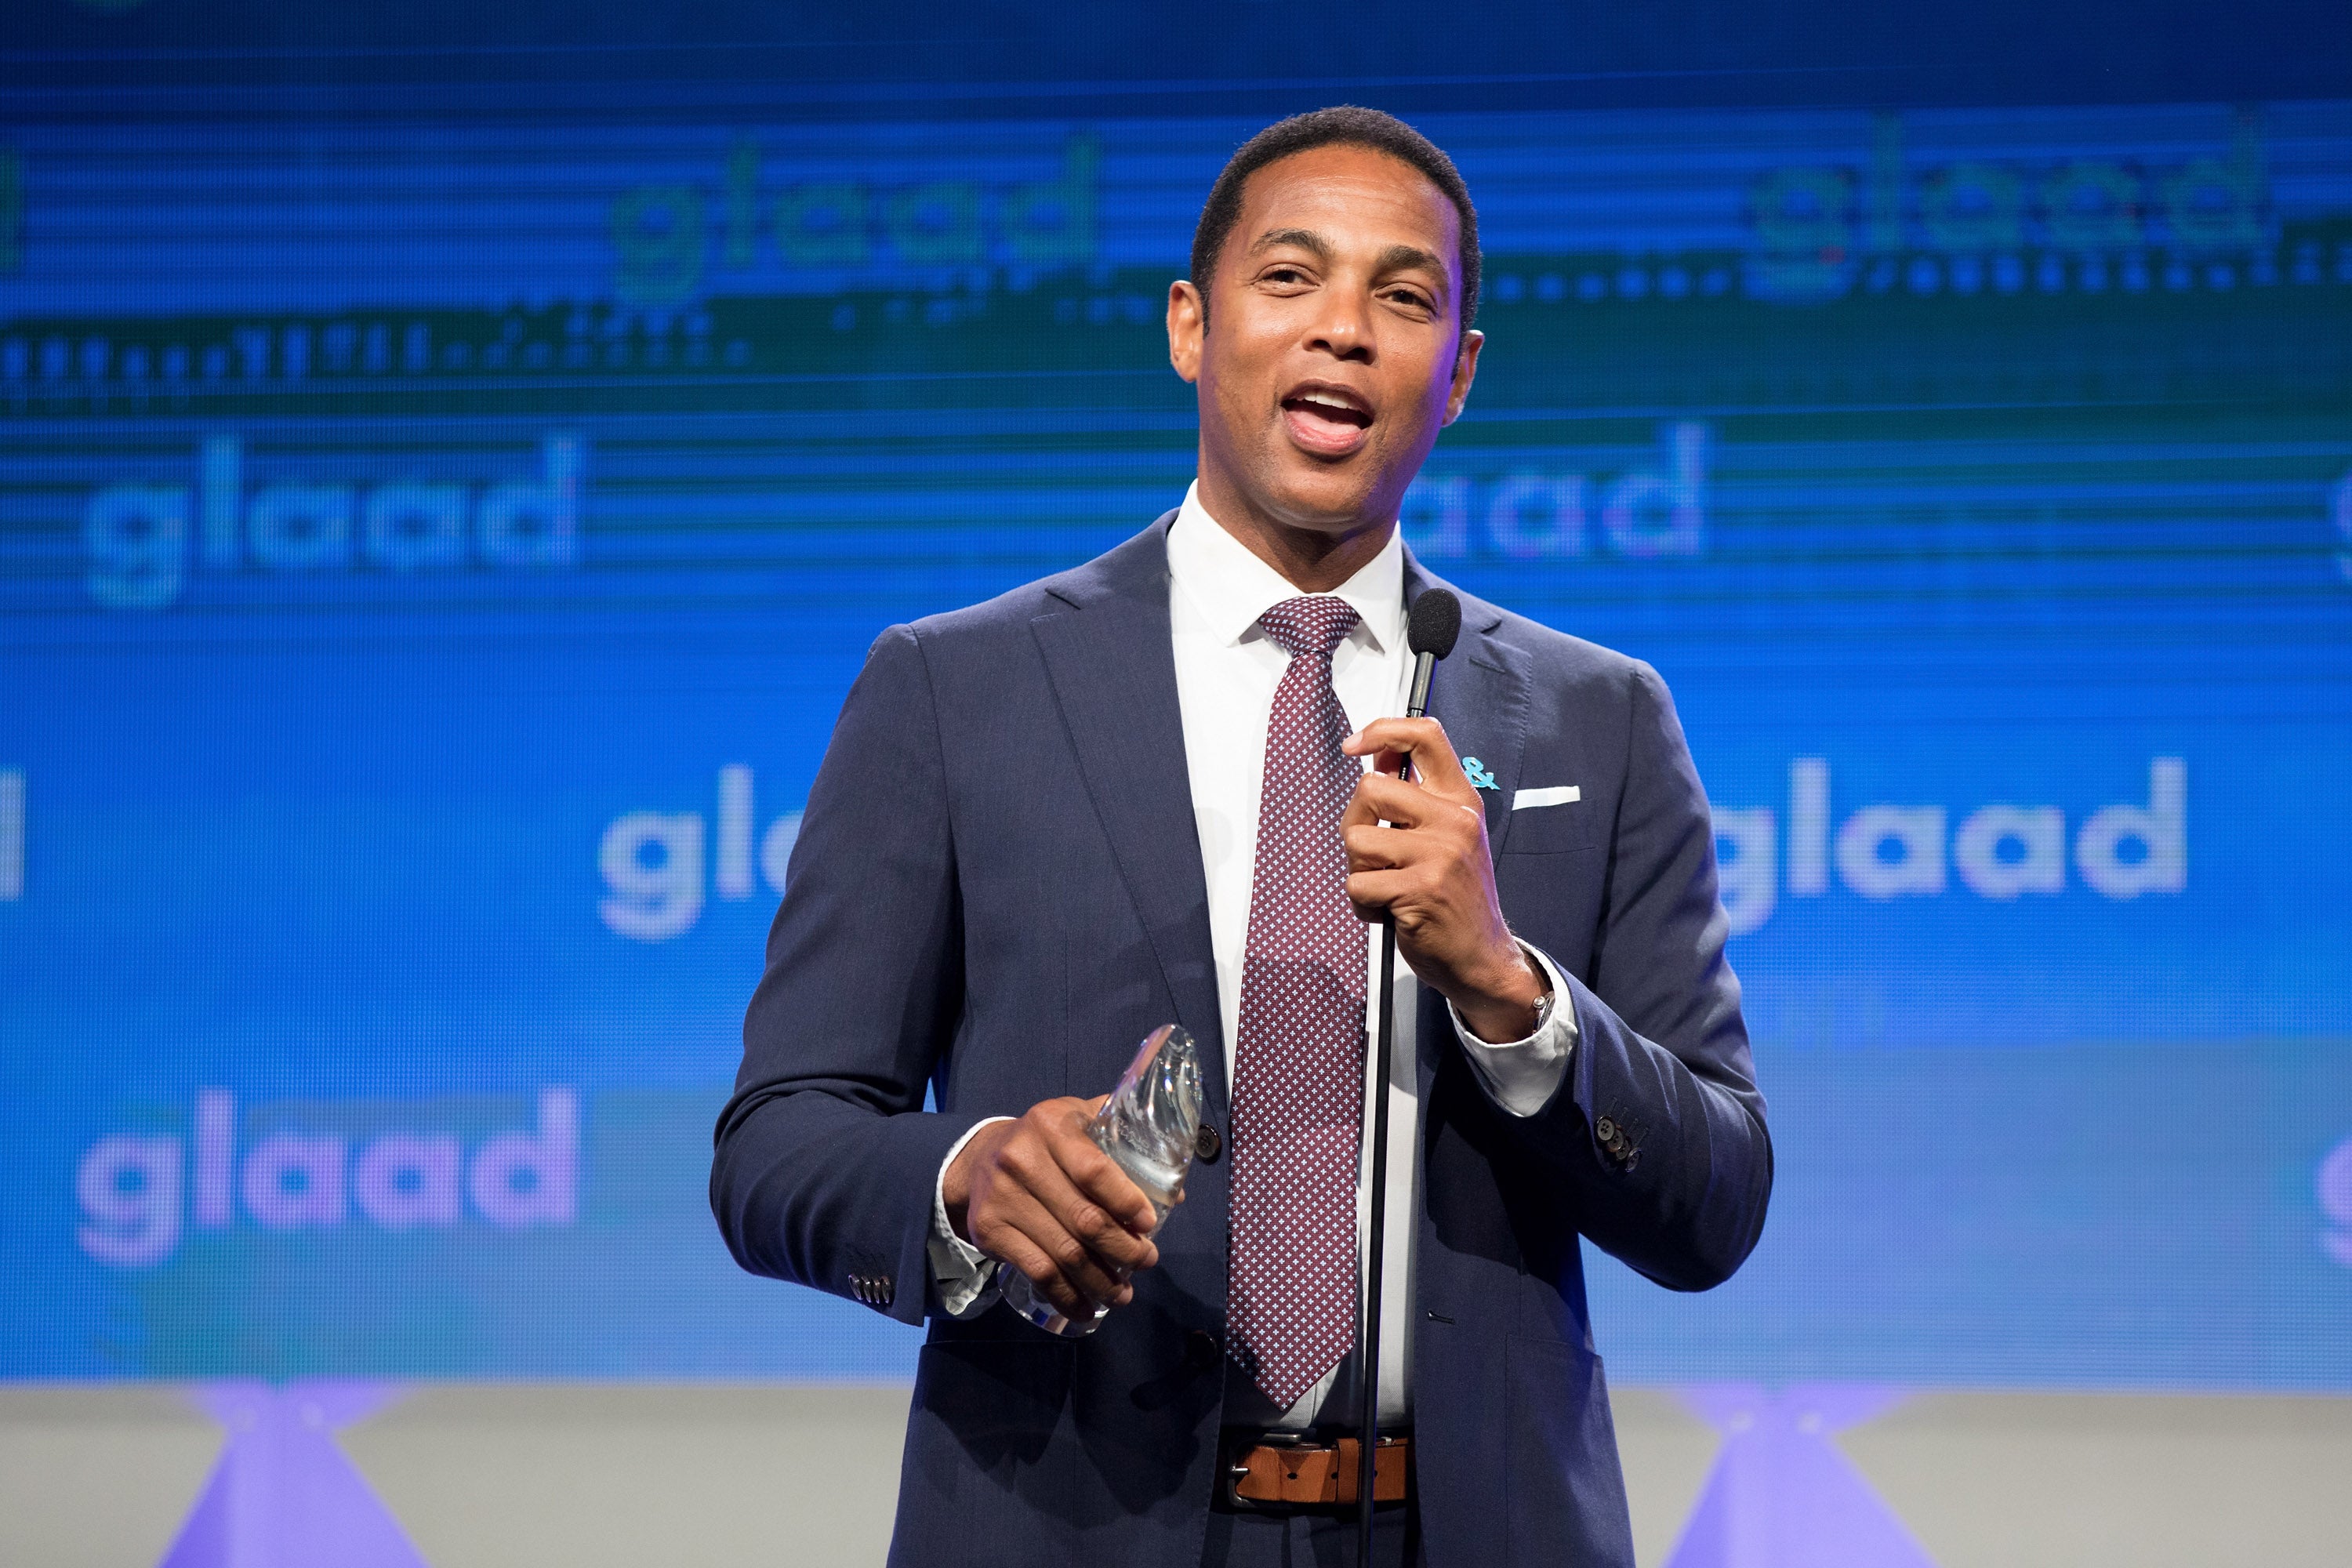 Don Lemon Gives Moving Speech At GLAAD Gala: ‘I Ain’t Scared Of Nobody’
